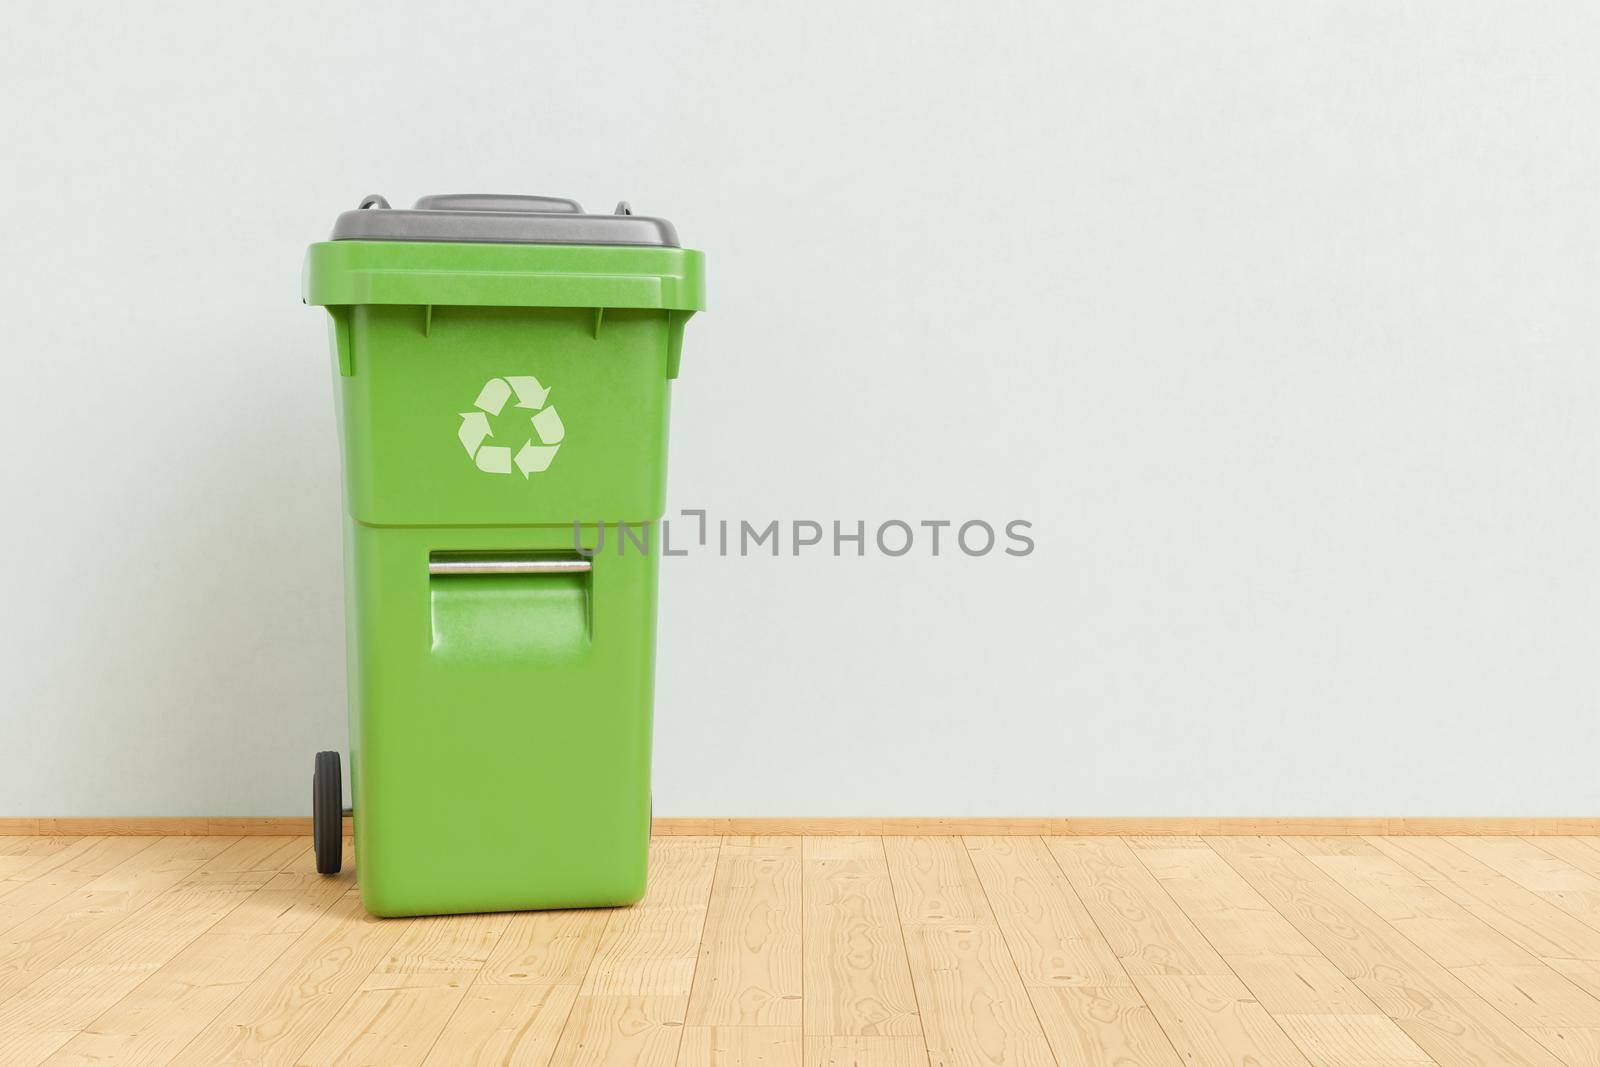 3D illustration of green recycling bin for trash placed on wooden floor against gray wall at home